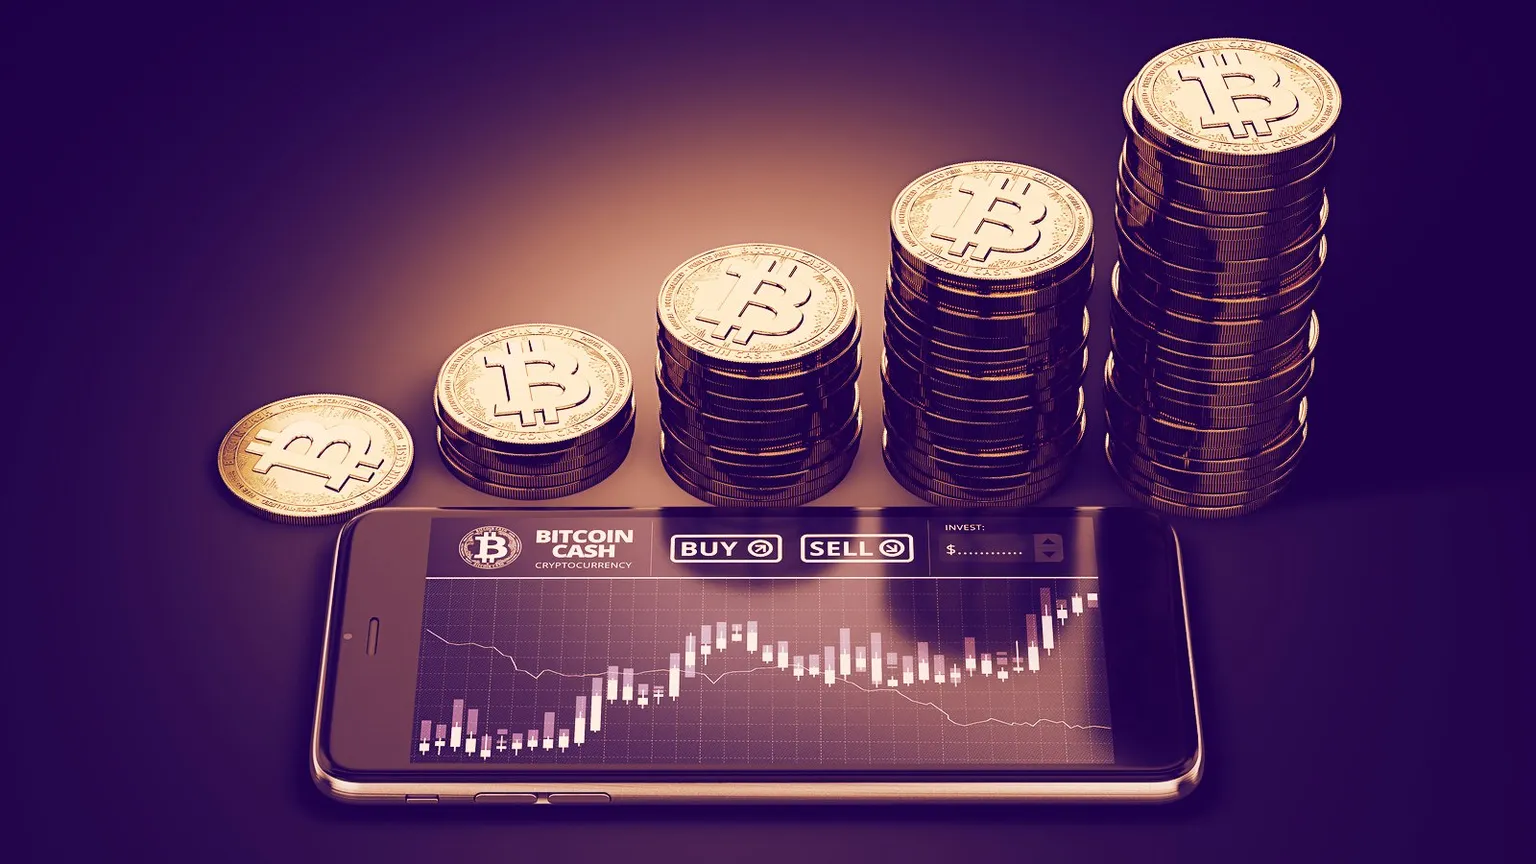 Bitcoin’s price has partly recovered from its downward spiral last Wednesday, with highs of almost $9,600 this week. Image: Shutterstock